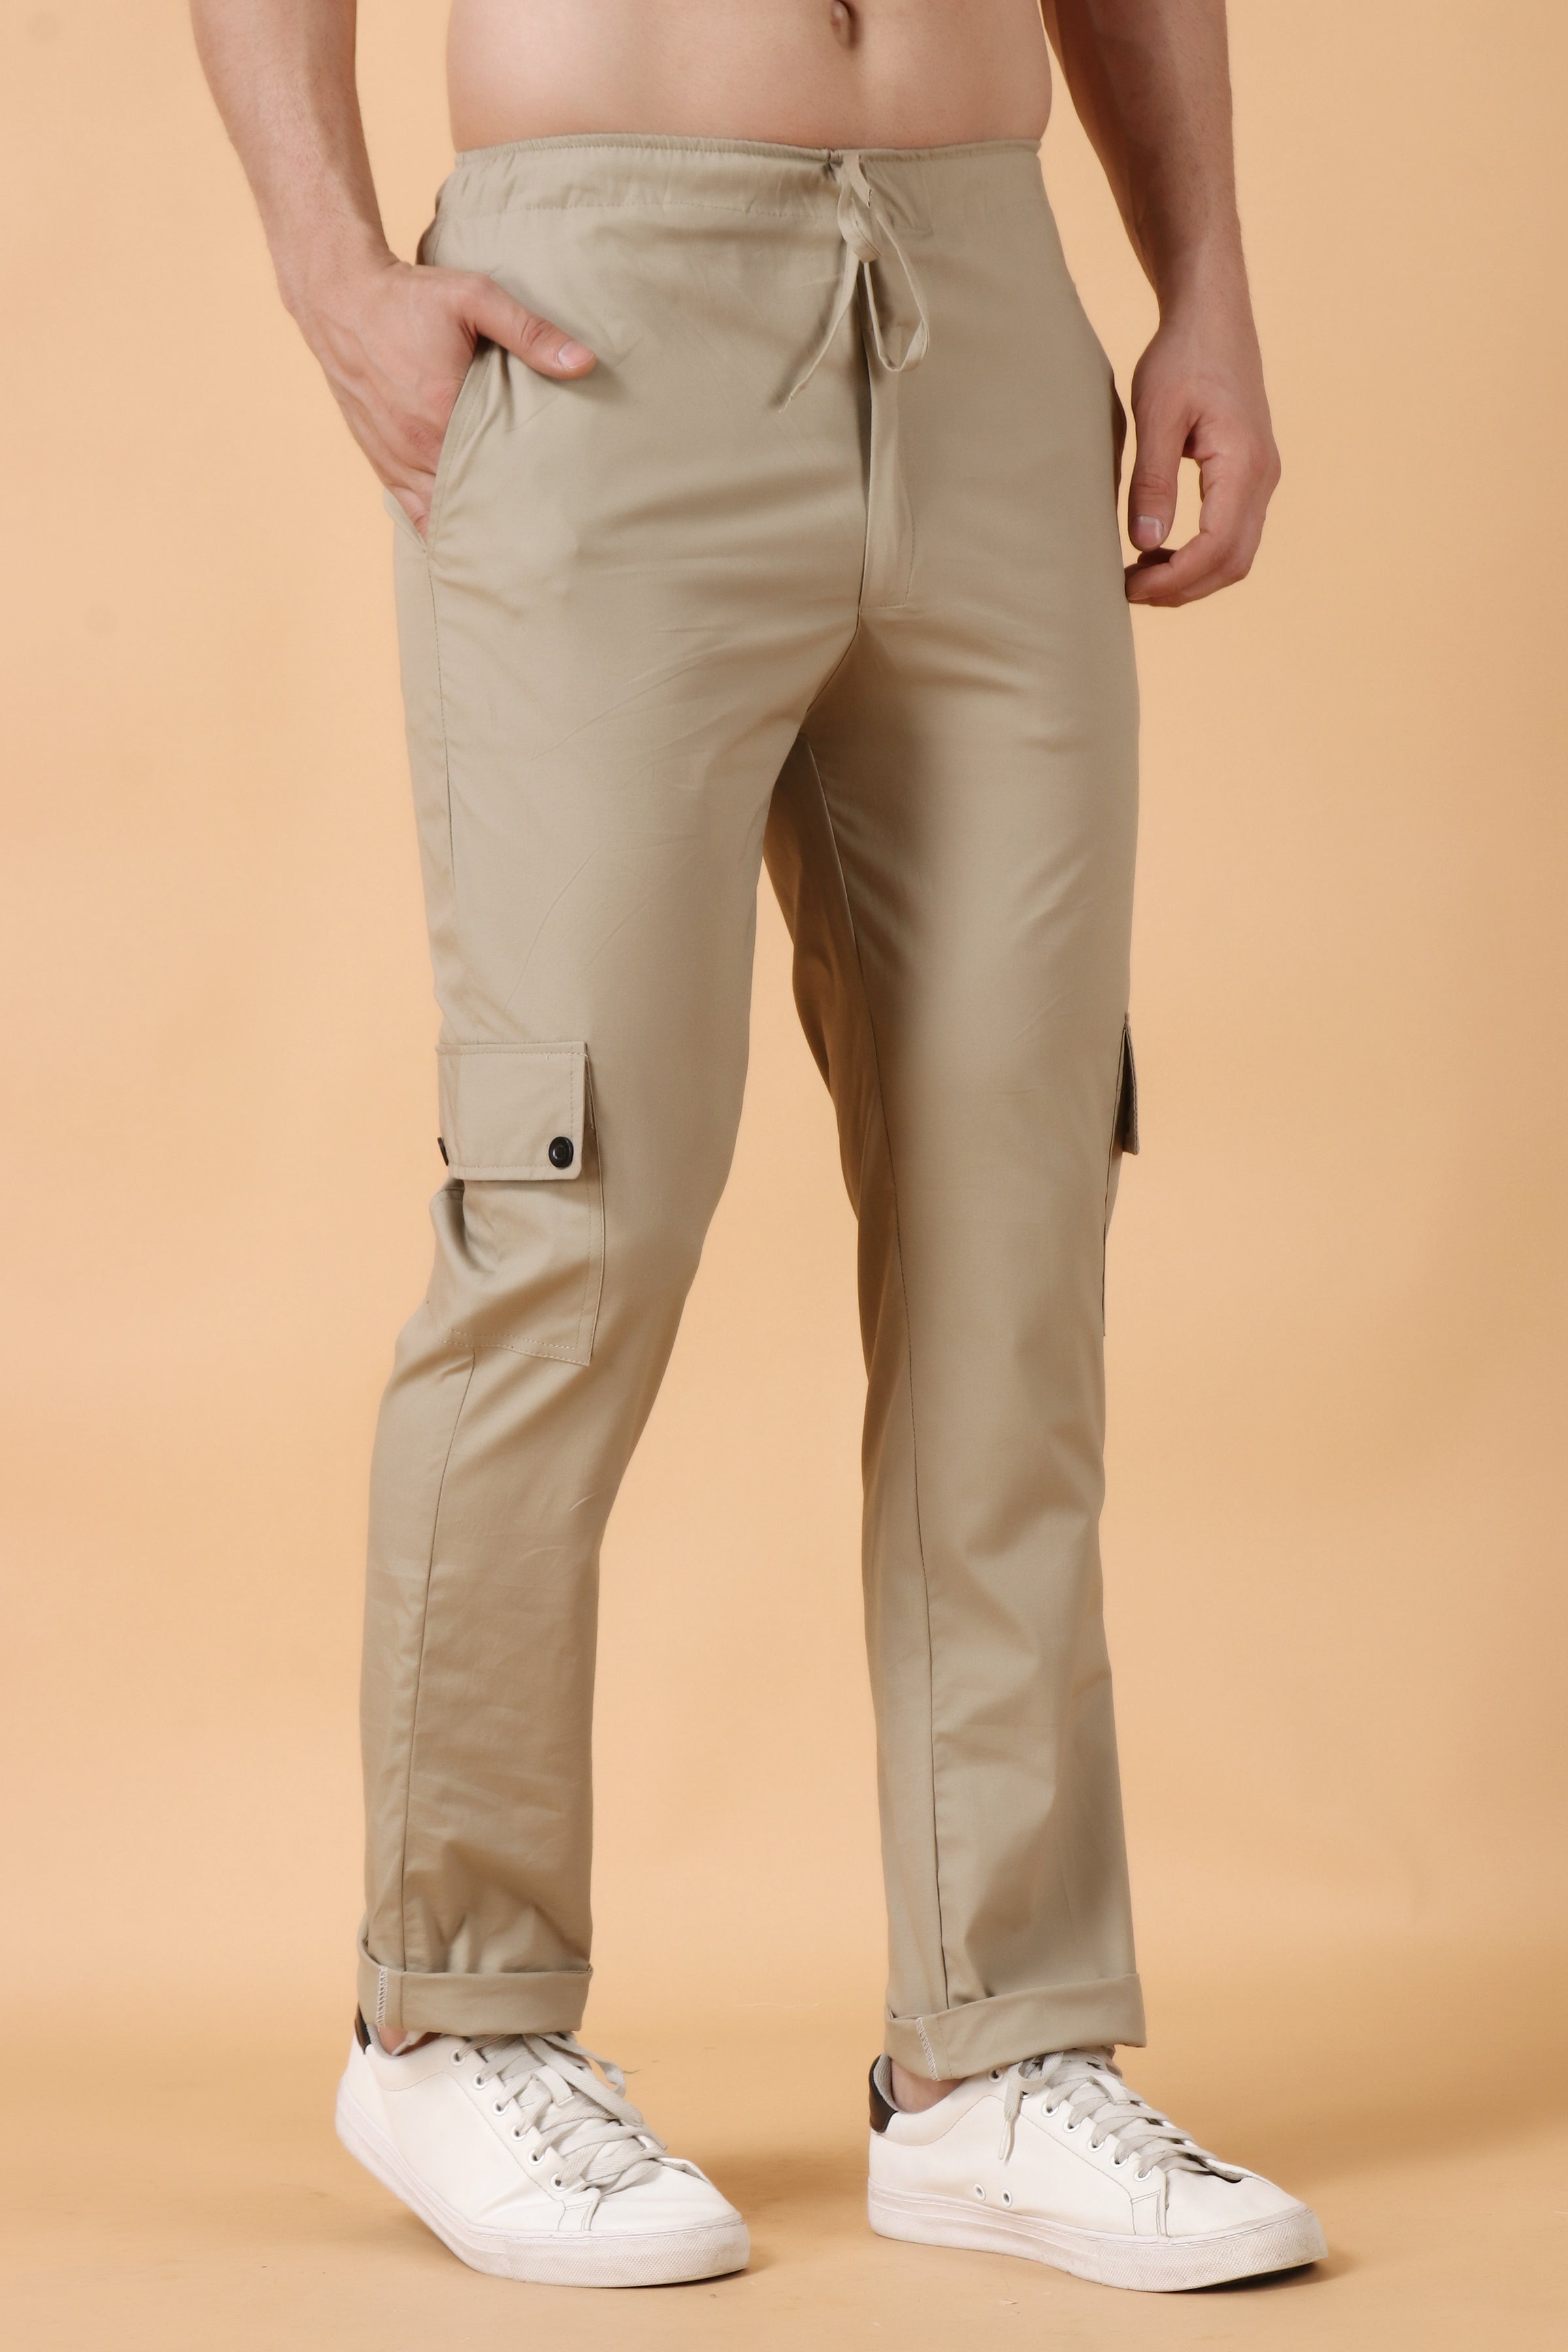 Matchstick Mens Retro Relaxed Plus Size Cargo Pants India | Ubuy